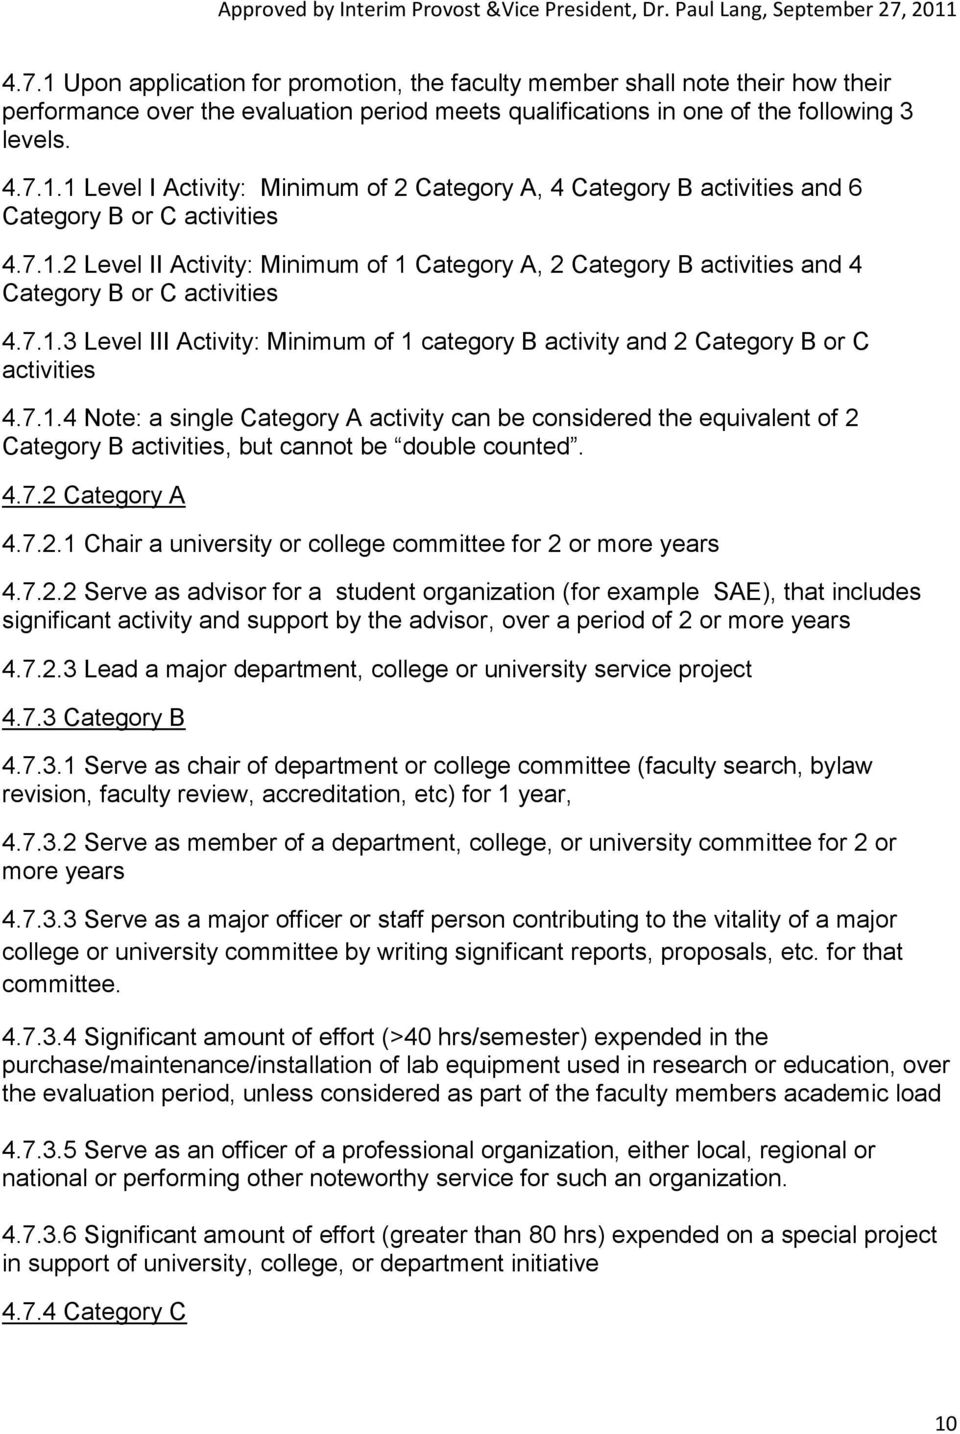 7.1.4 Note: a single Category A activity can be considered the equivalent of 2 Category B activities, but cannot be double counted. 4.7.2 Category A 4.7.2.1 Chair a university or college committee for 2 or more years 4.